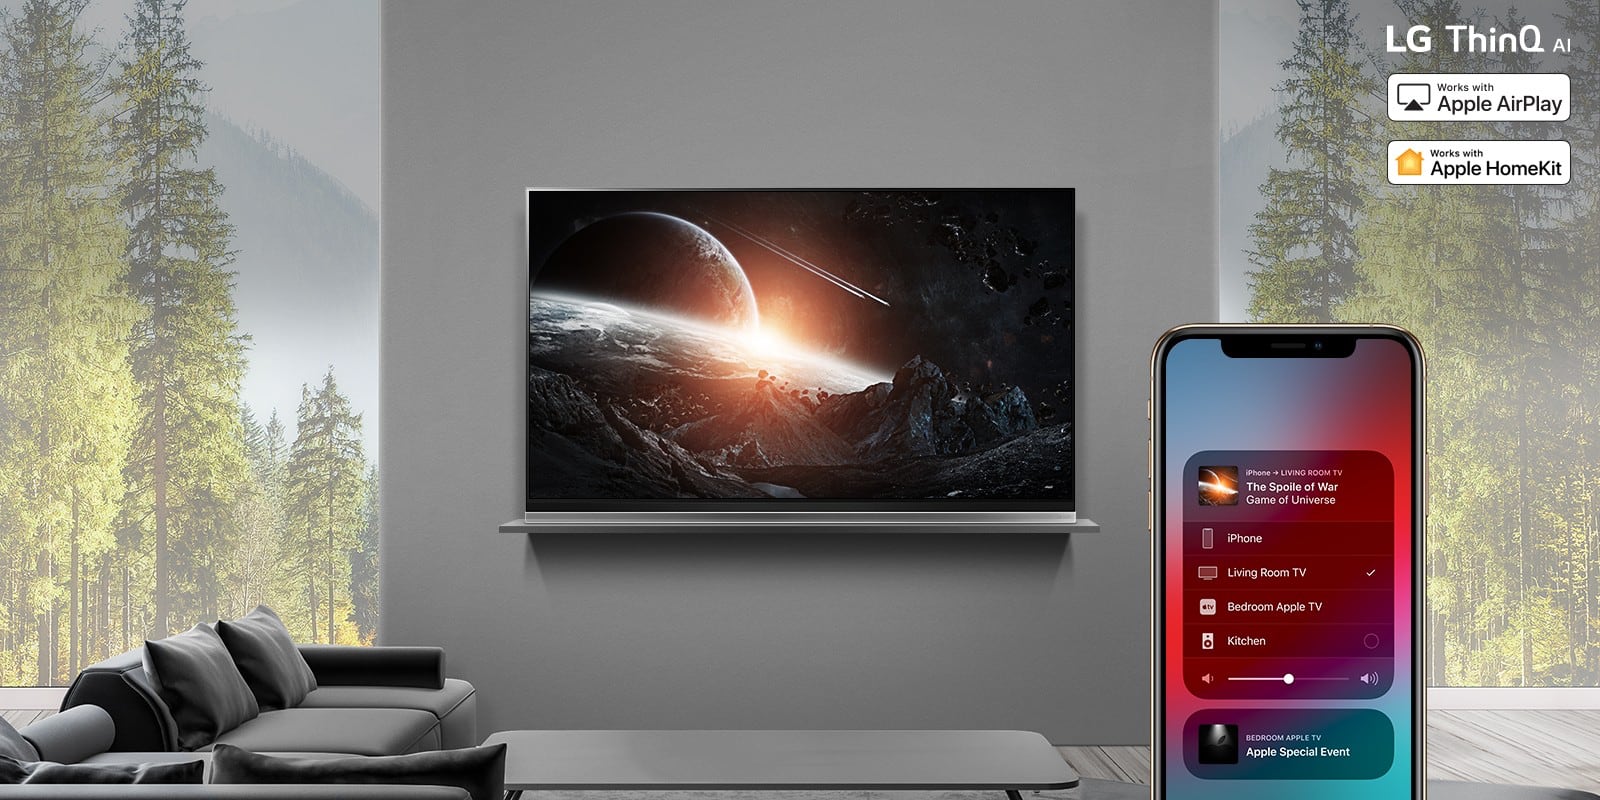 rolls out AirPlay 2 & 2019 TVs -